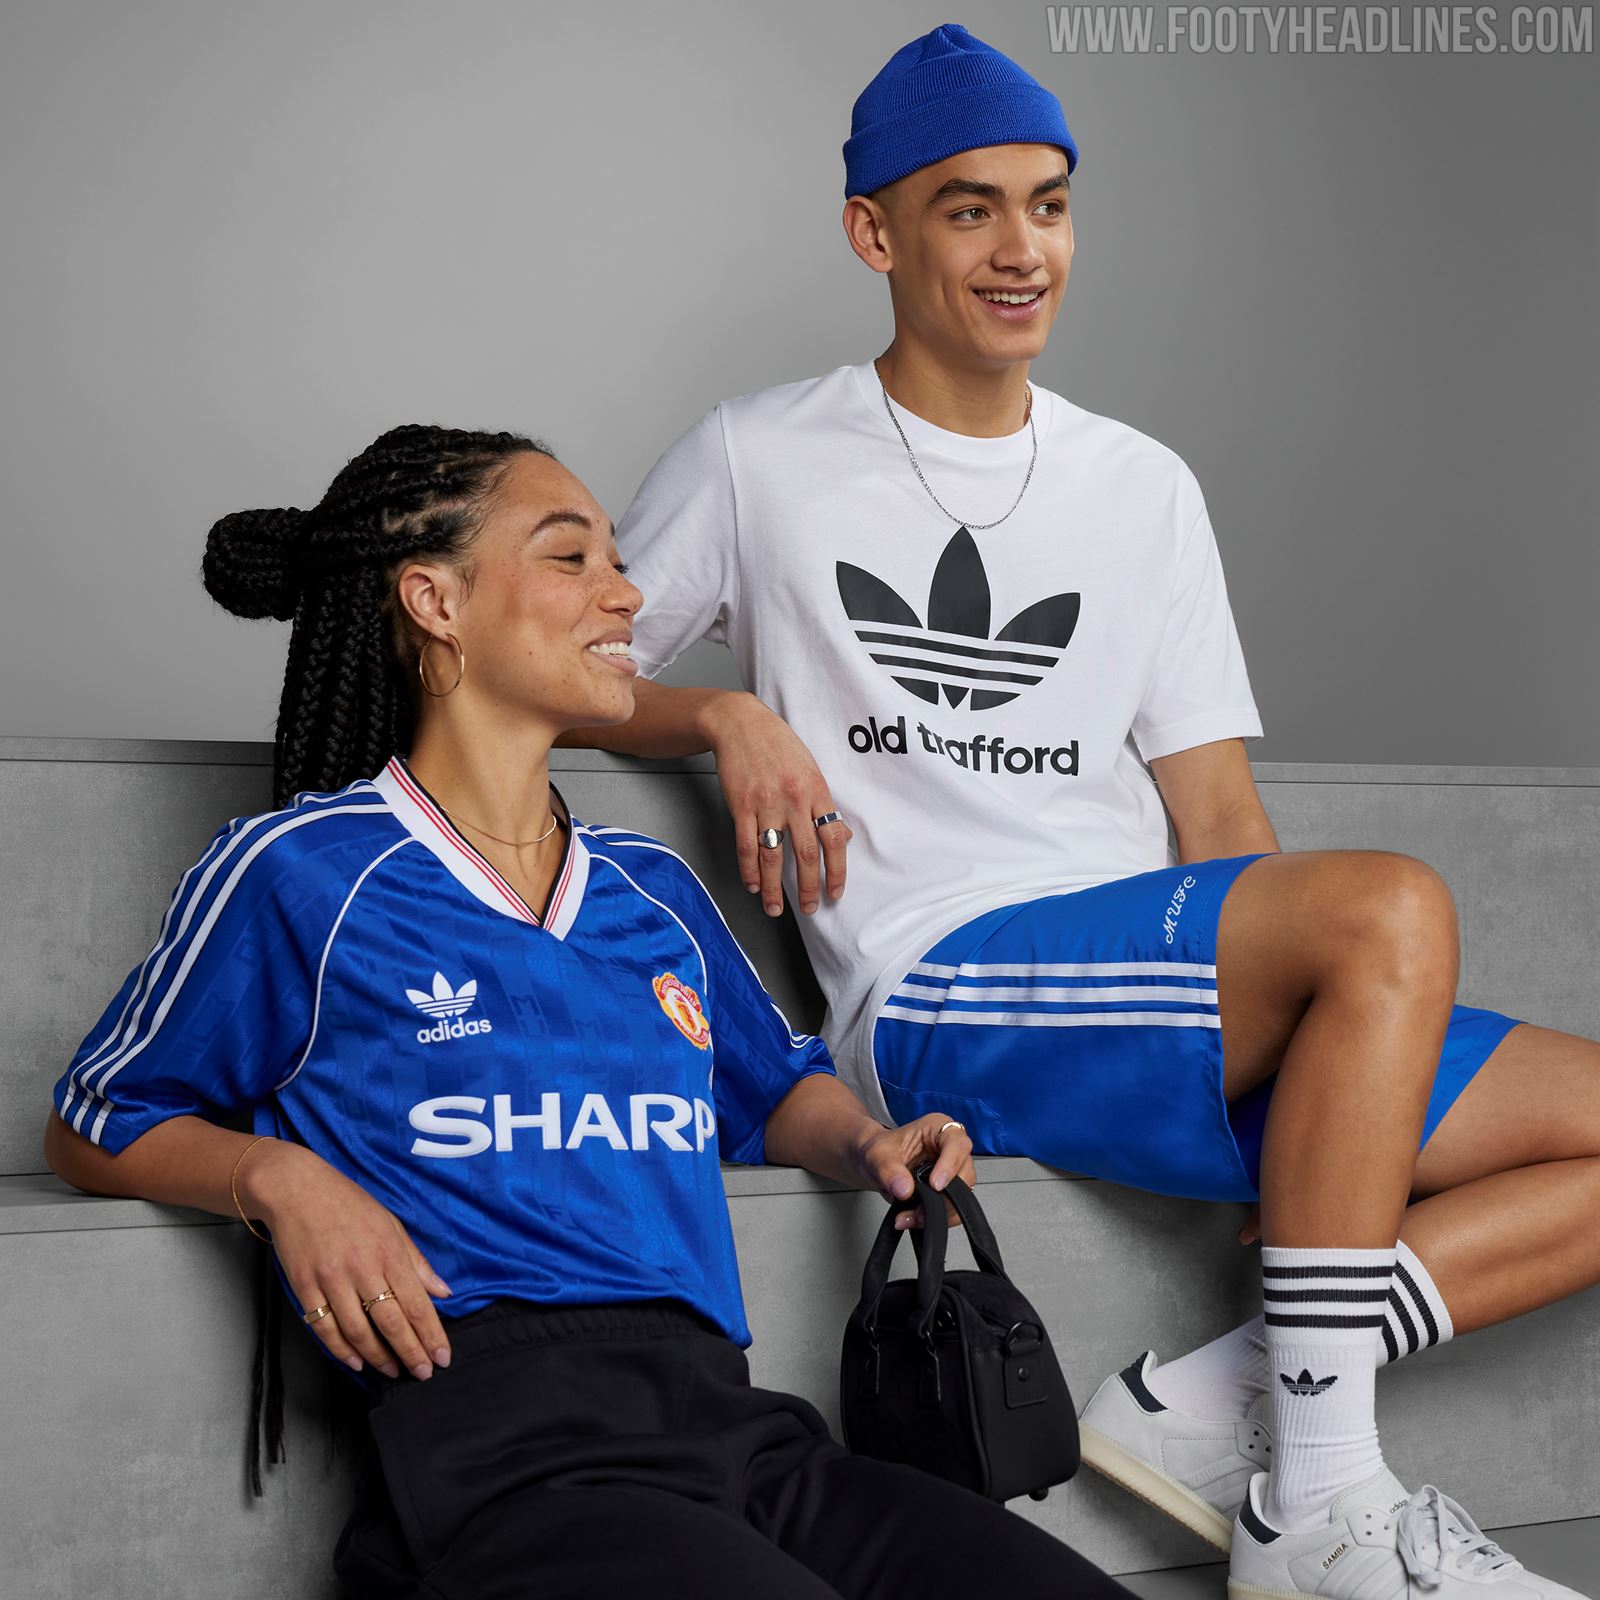 Adidas Manchester United 1988-1990 Third Kit Remake + Full Collection Footy Headlines